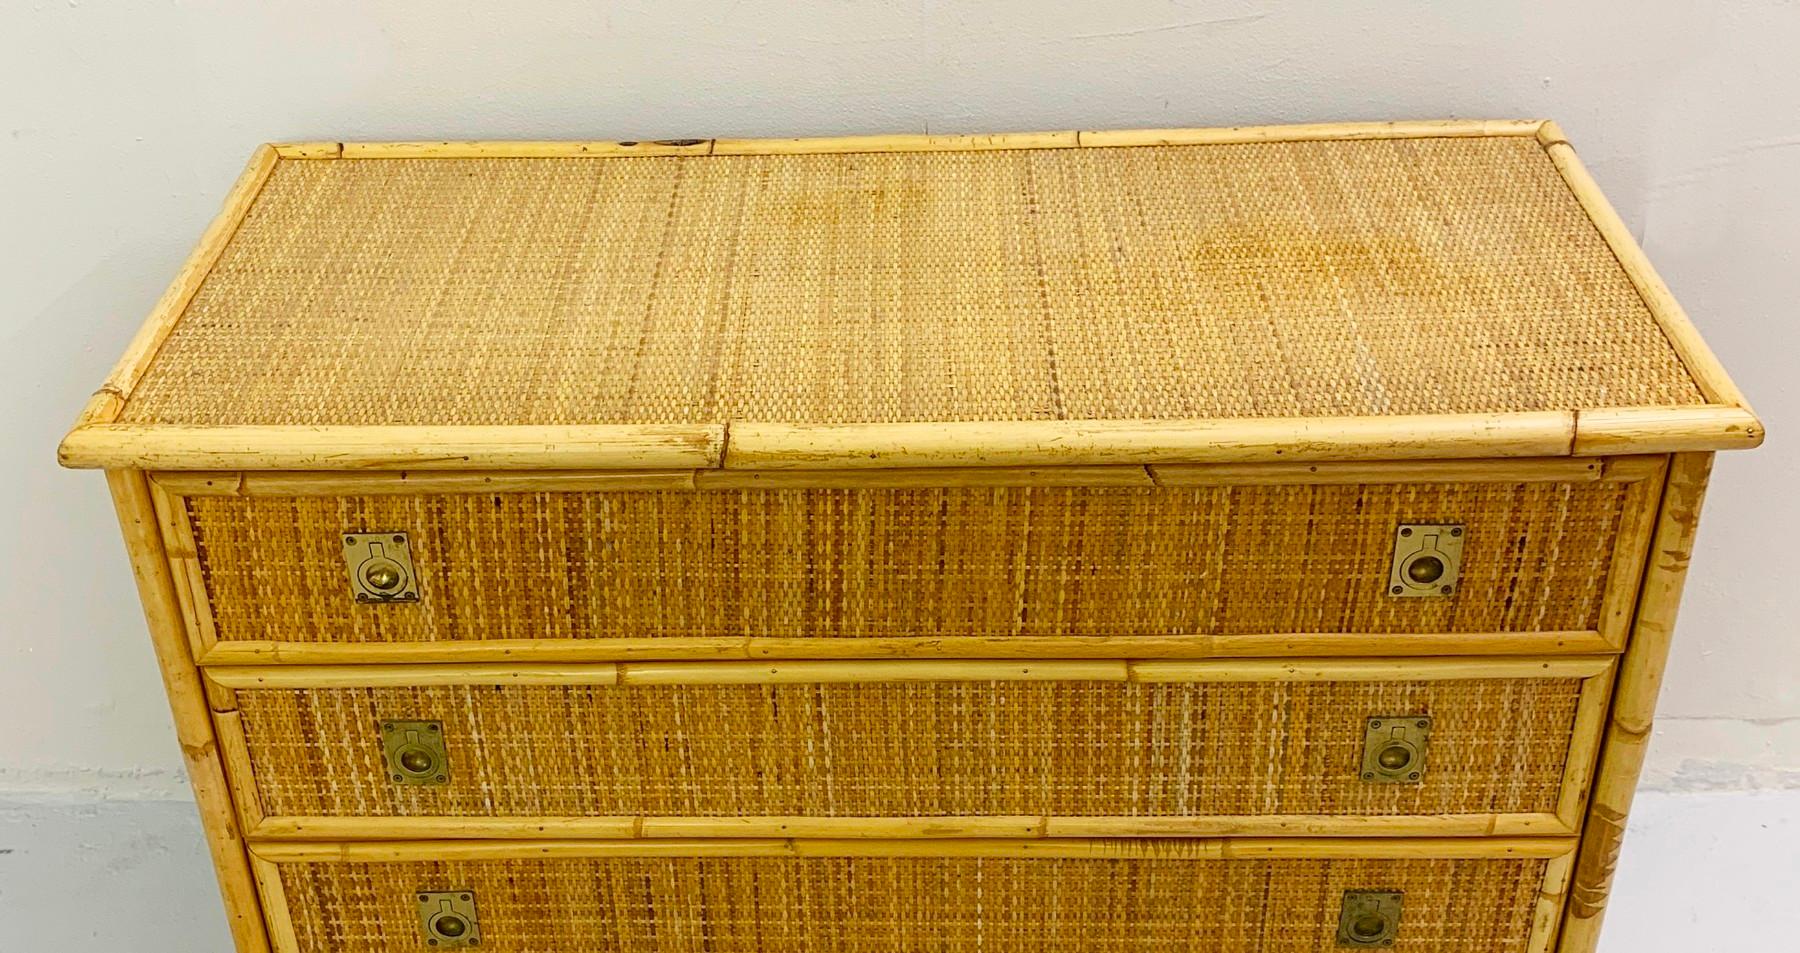 wicker chest of drawers